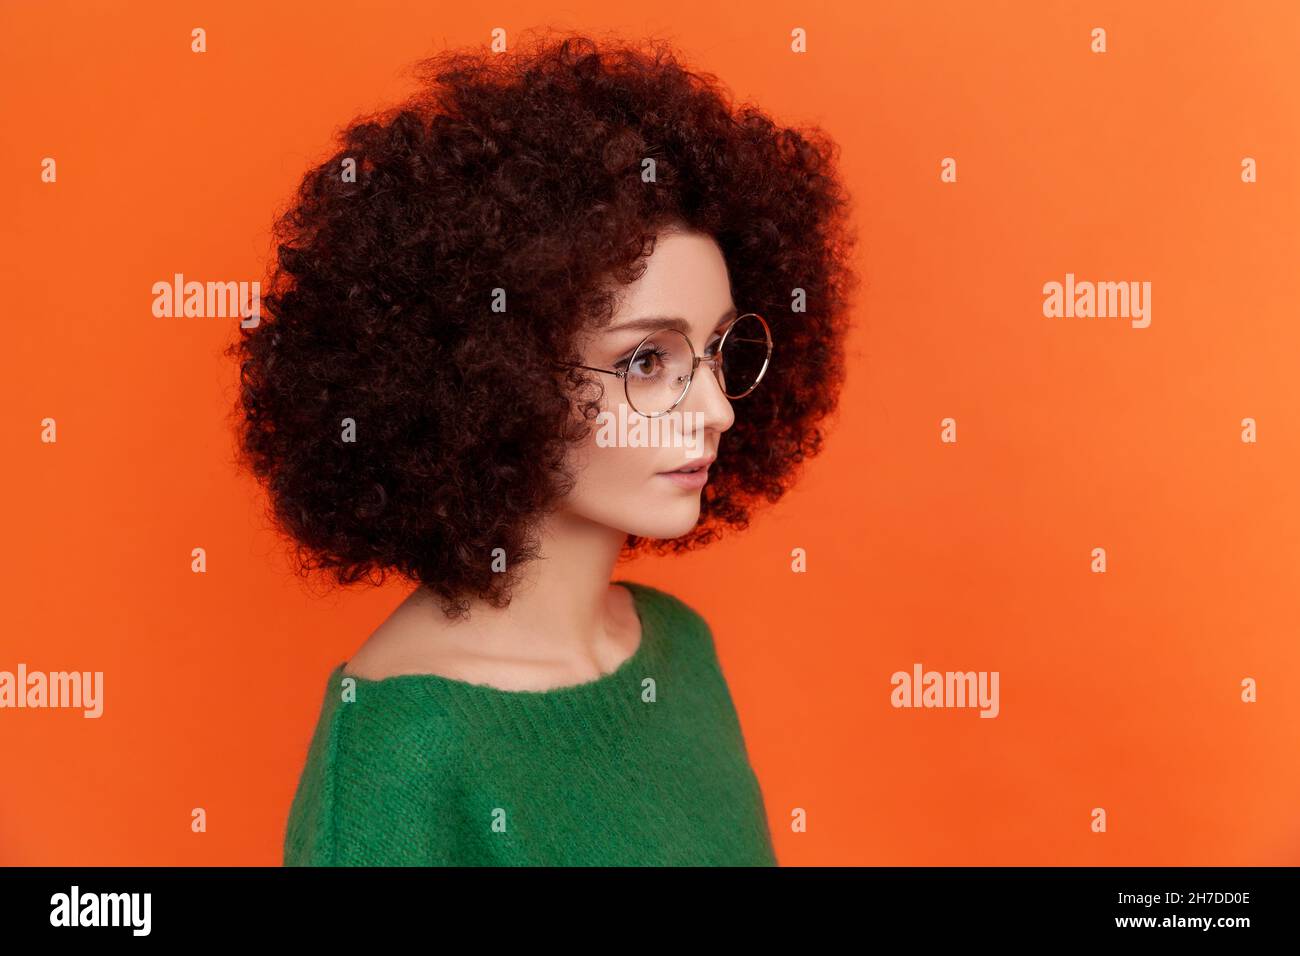 Side view of beautiful woman with Afro hairstyle wearing green casual style sweater and optical eyeglasses, looking away, skin care. Indoor studio shot isolated on orange background. Stock Photo